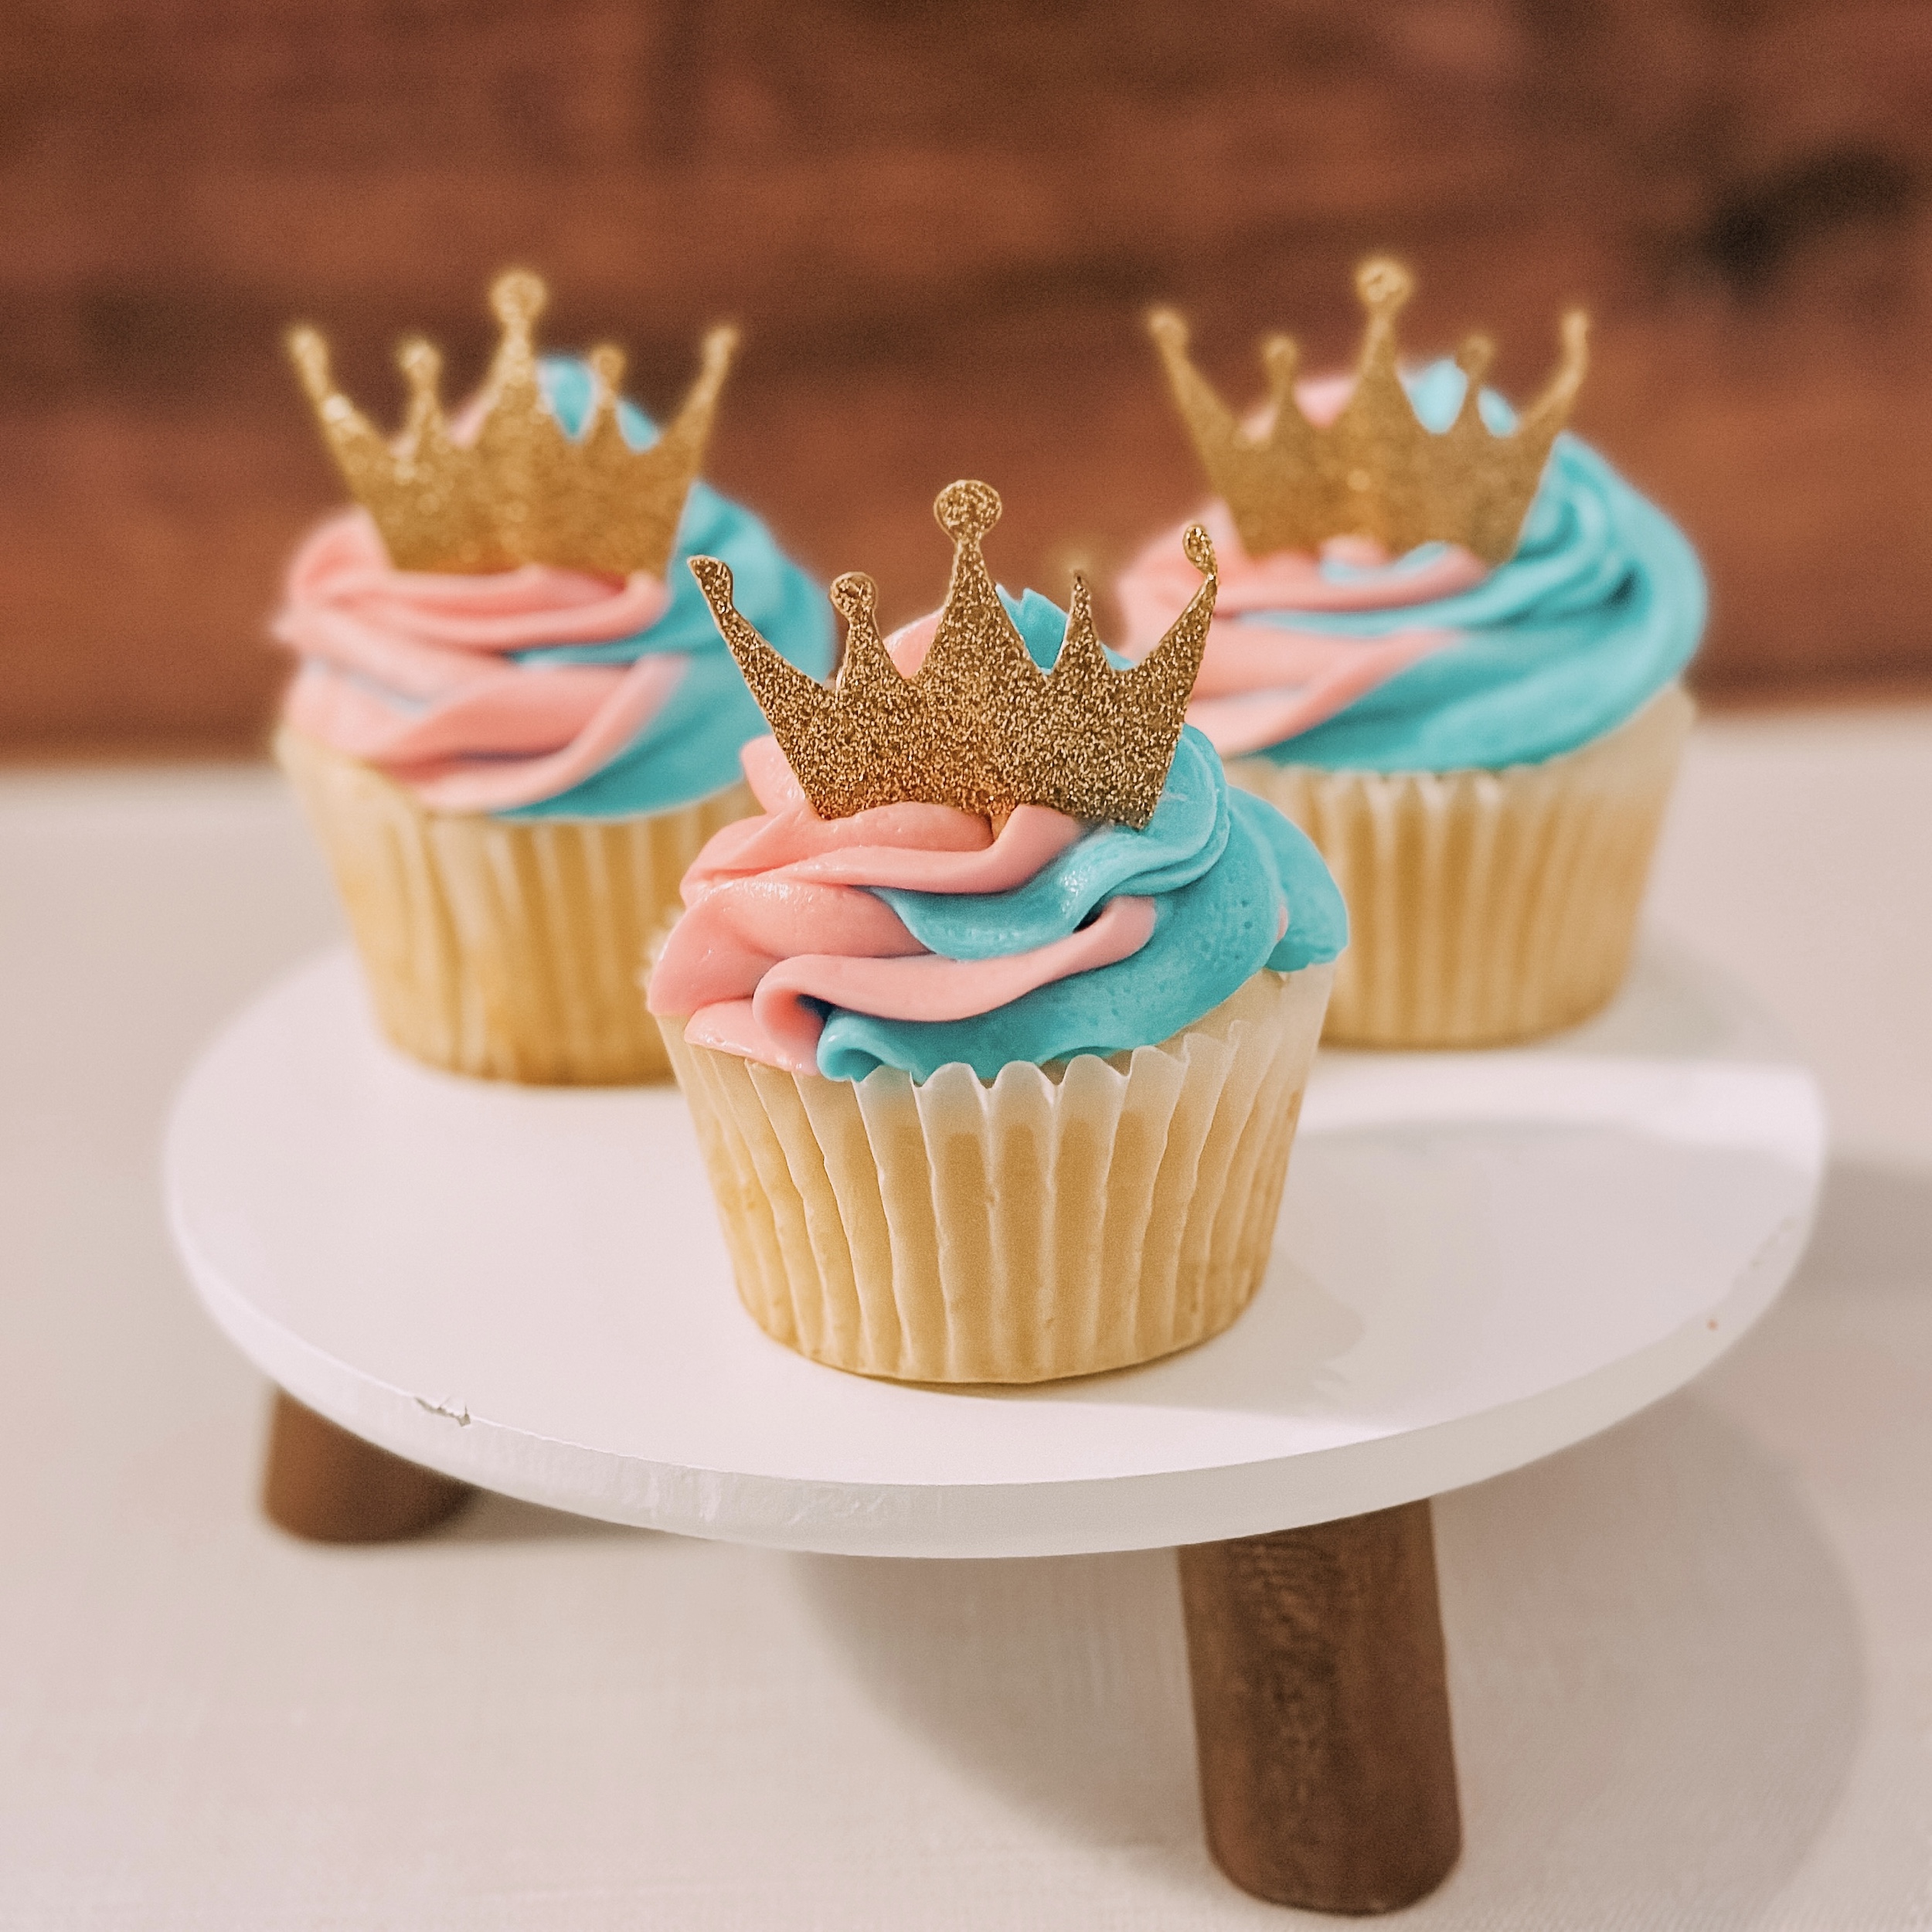 Three Sleeping Beauty Cupcakes (vanilla cupcakes with pink and blue swirl frosting and gold crown topper) on a platter